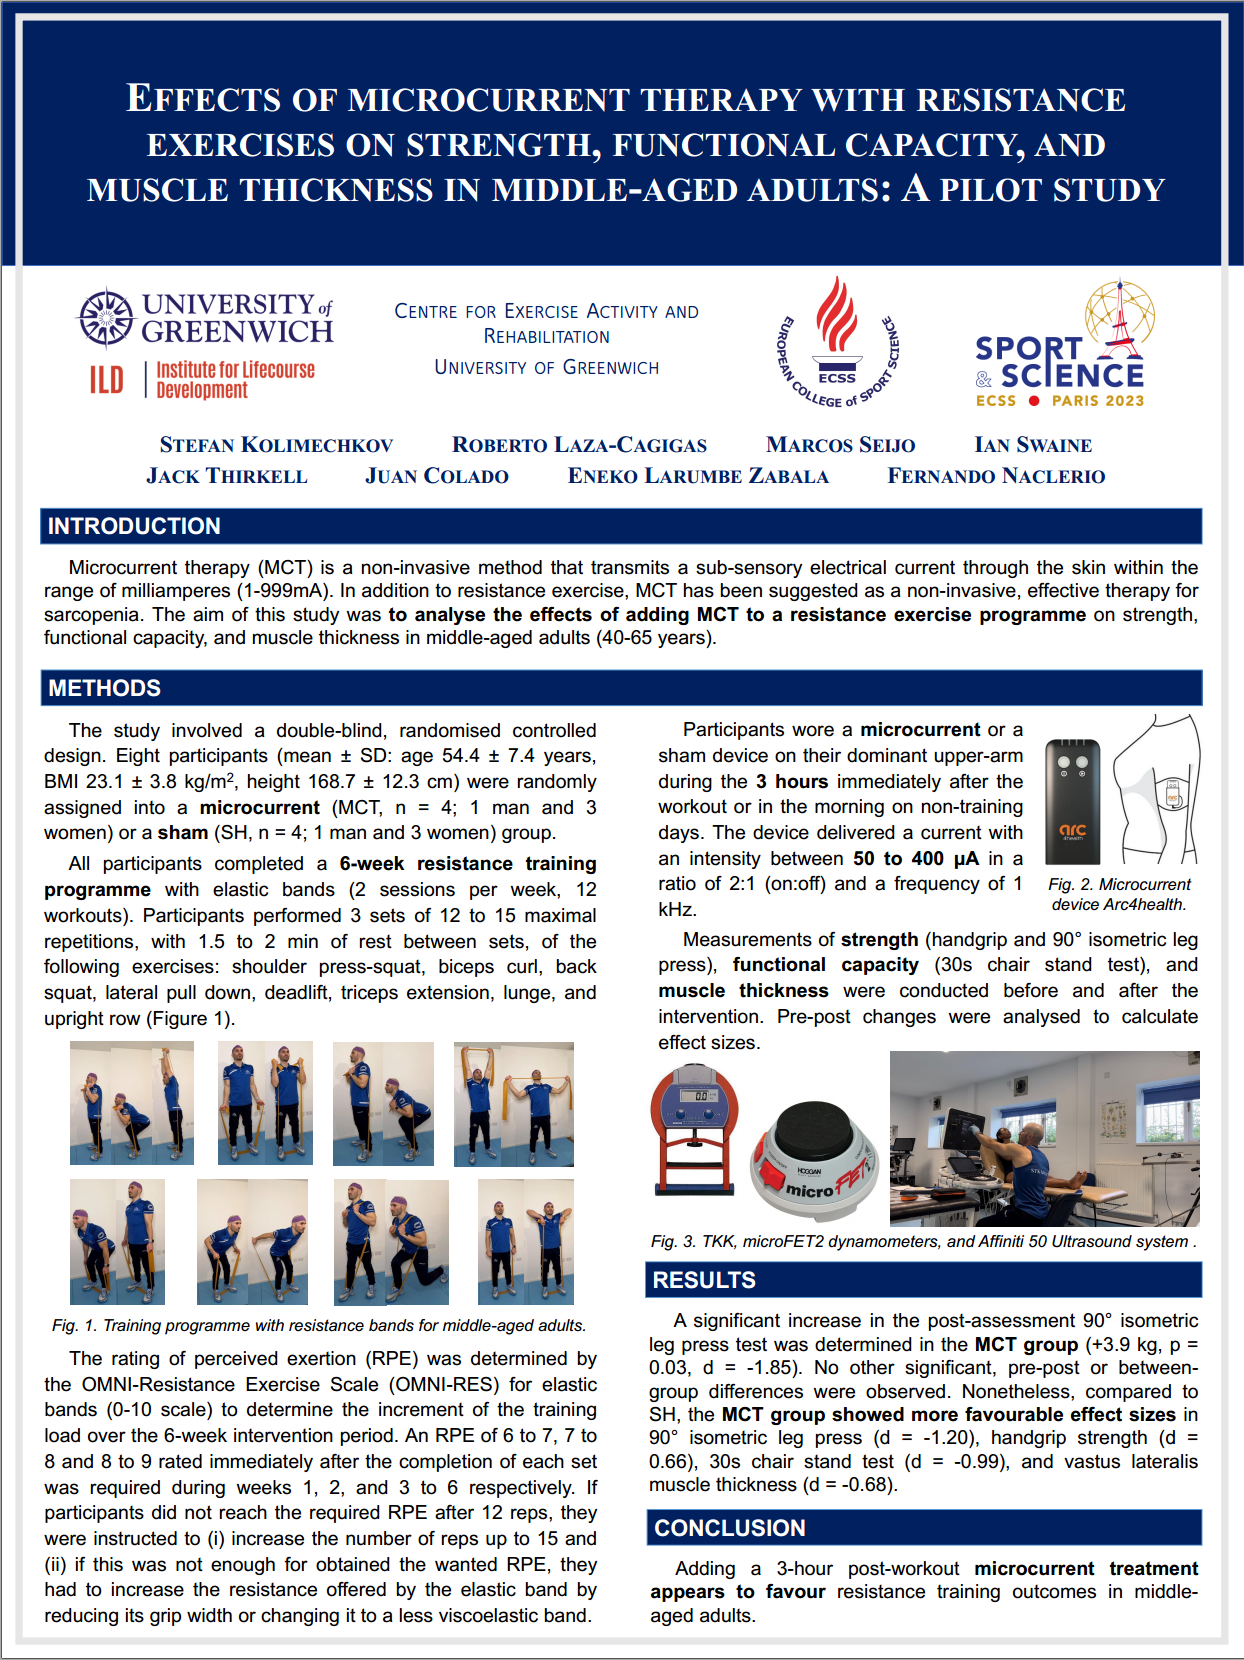 Effects of microcurrent therapy with resistance exercises on strength, functional capacity, and muscle thickness in middle-aged adults: A pilot study at the ECSS Congress in Paris 2023